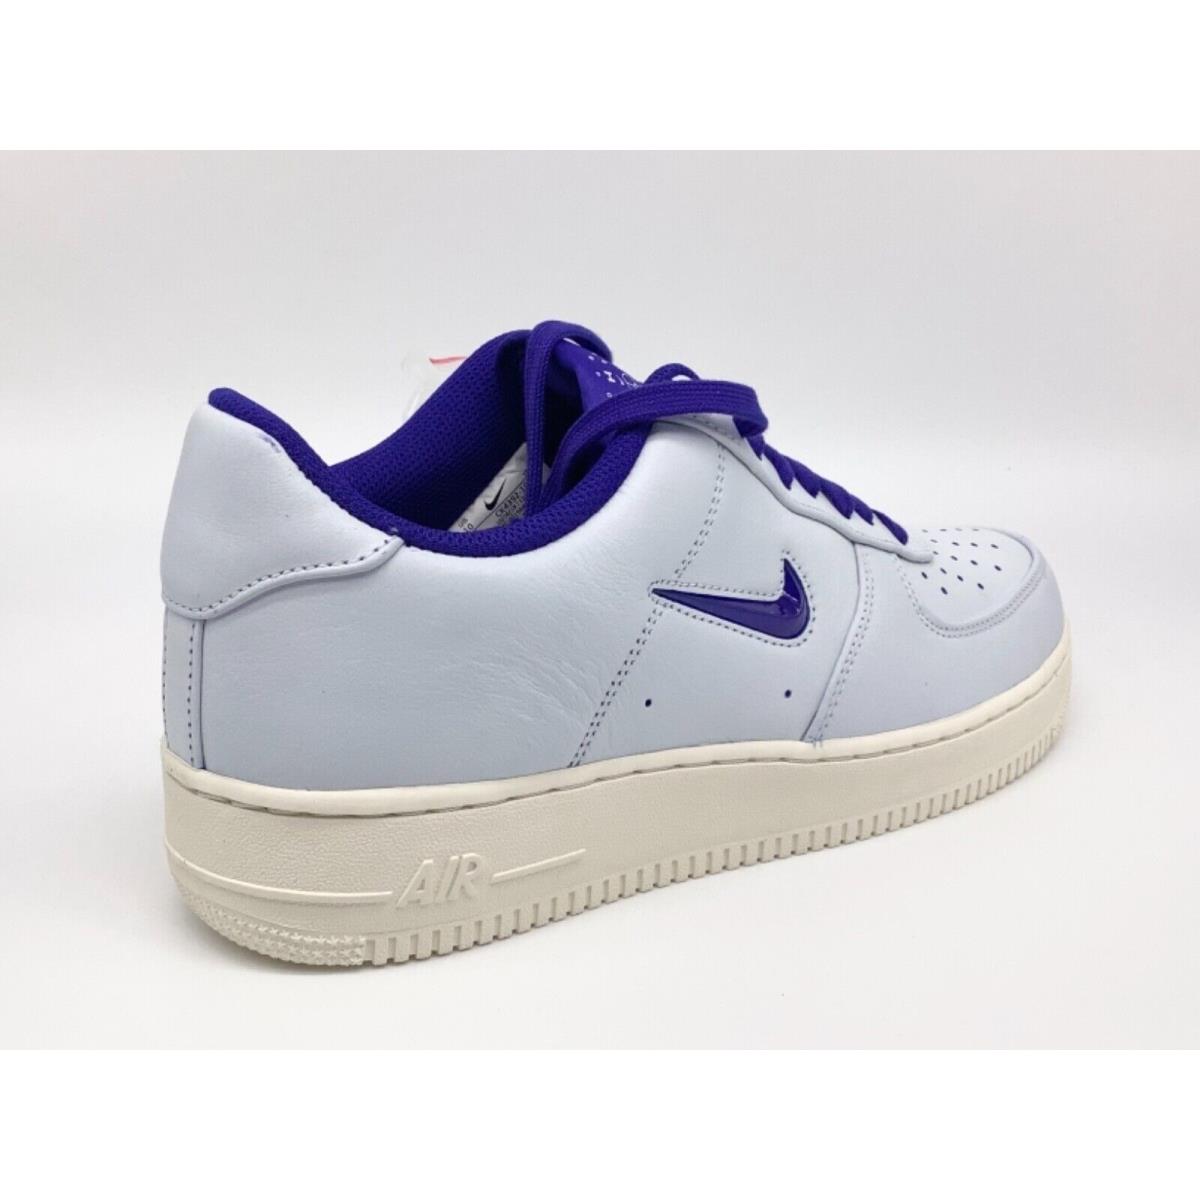 Nike shoes Air Force - Blue 2